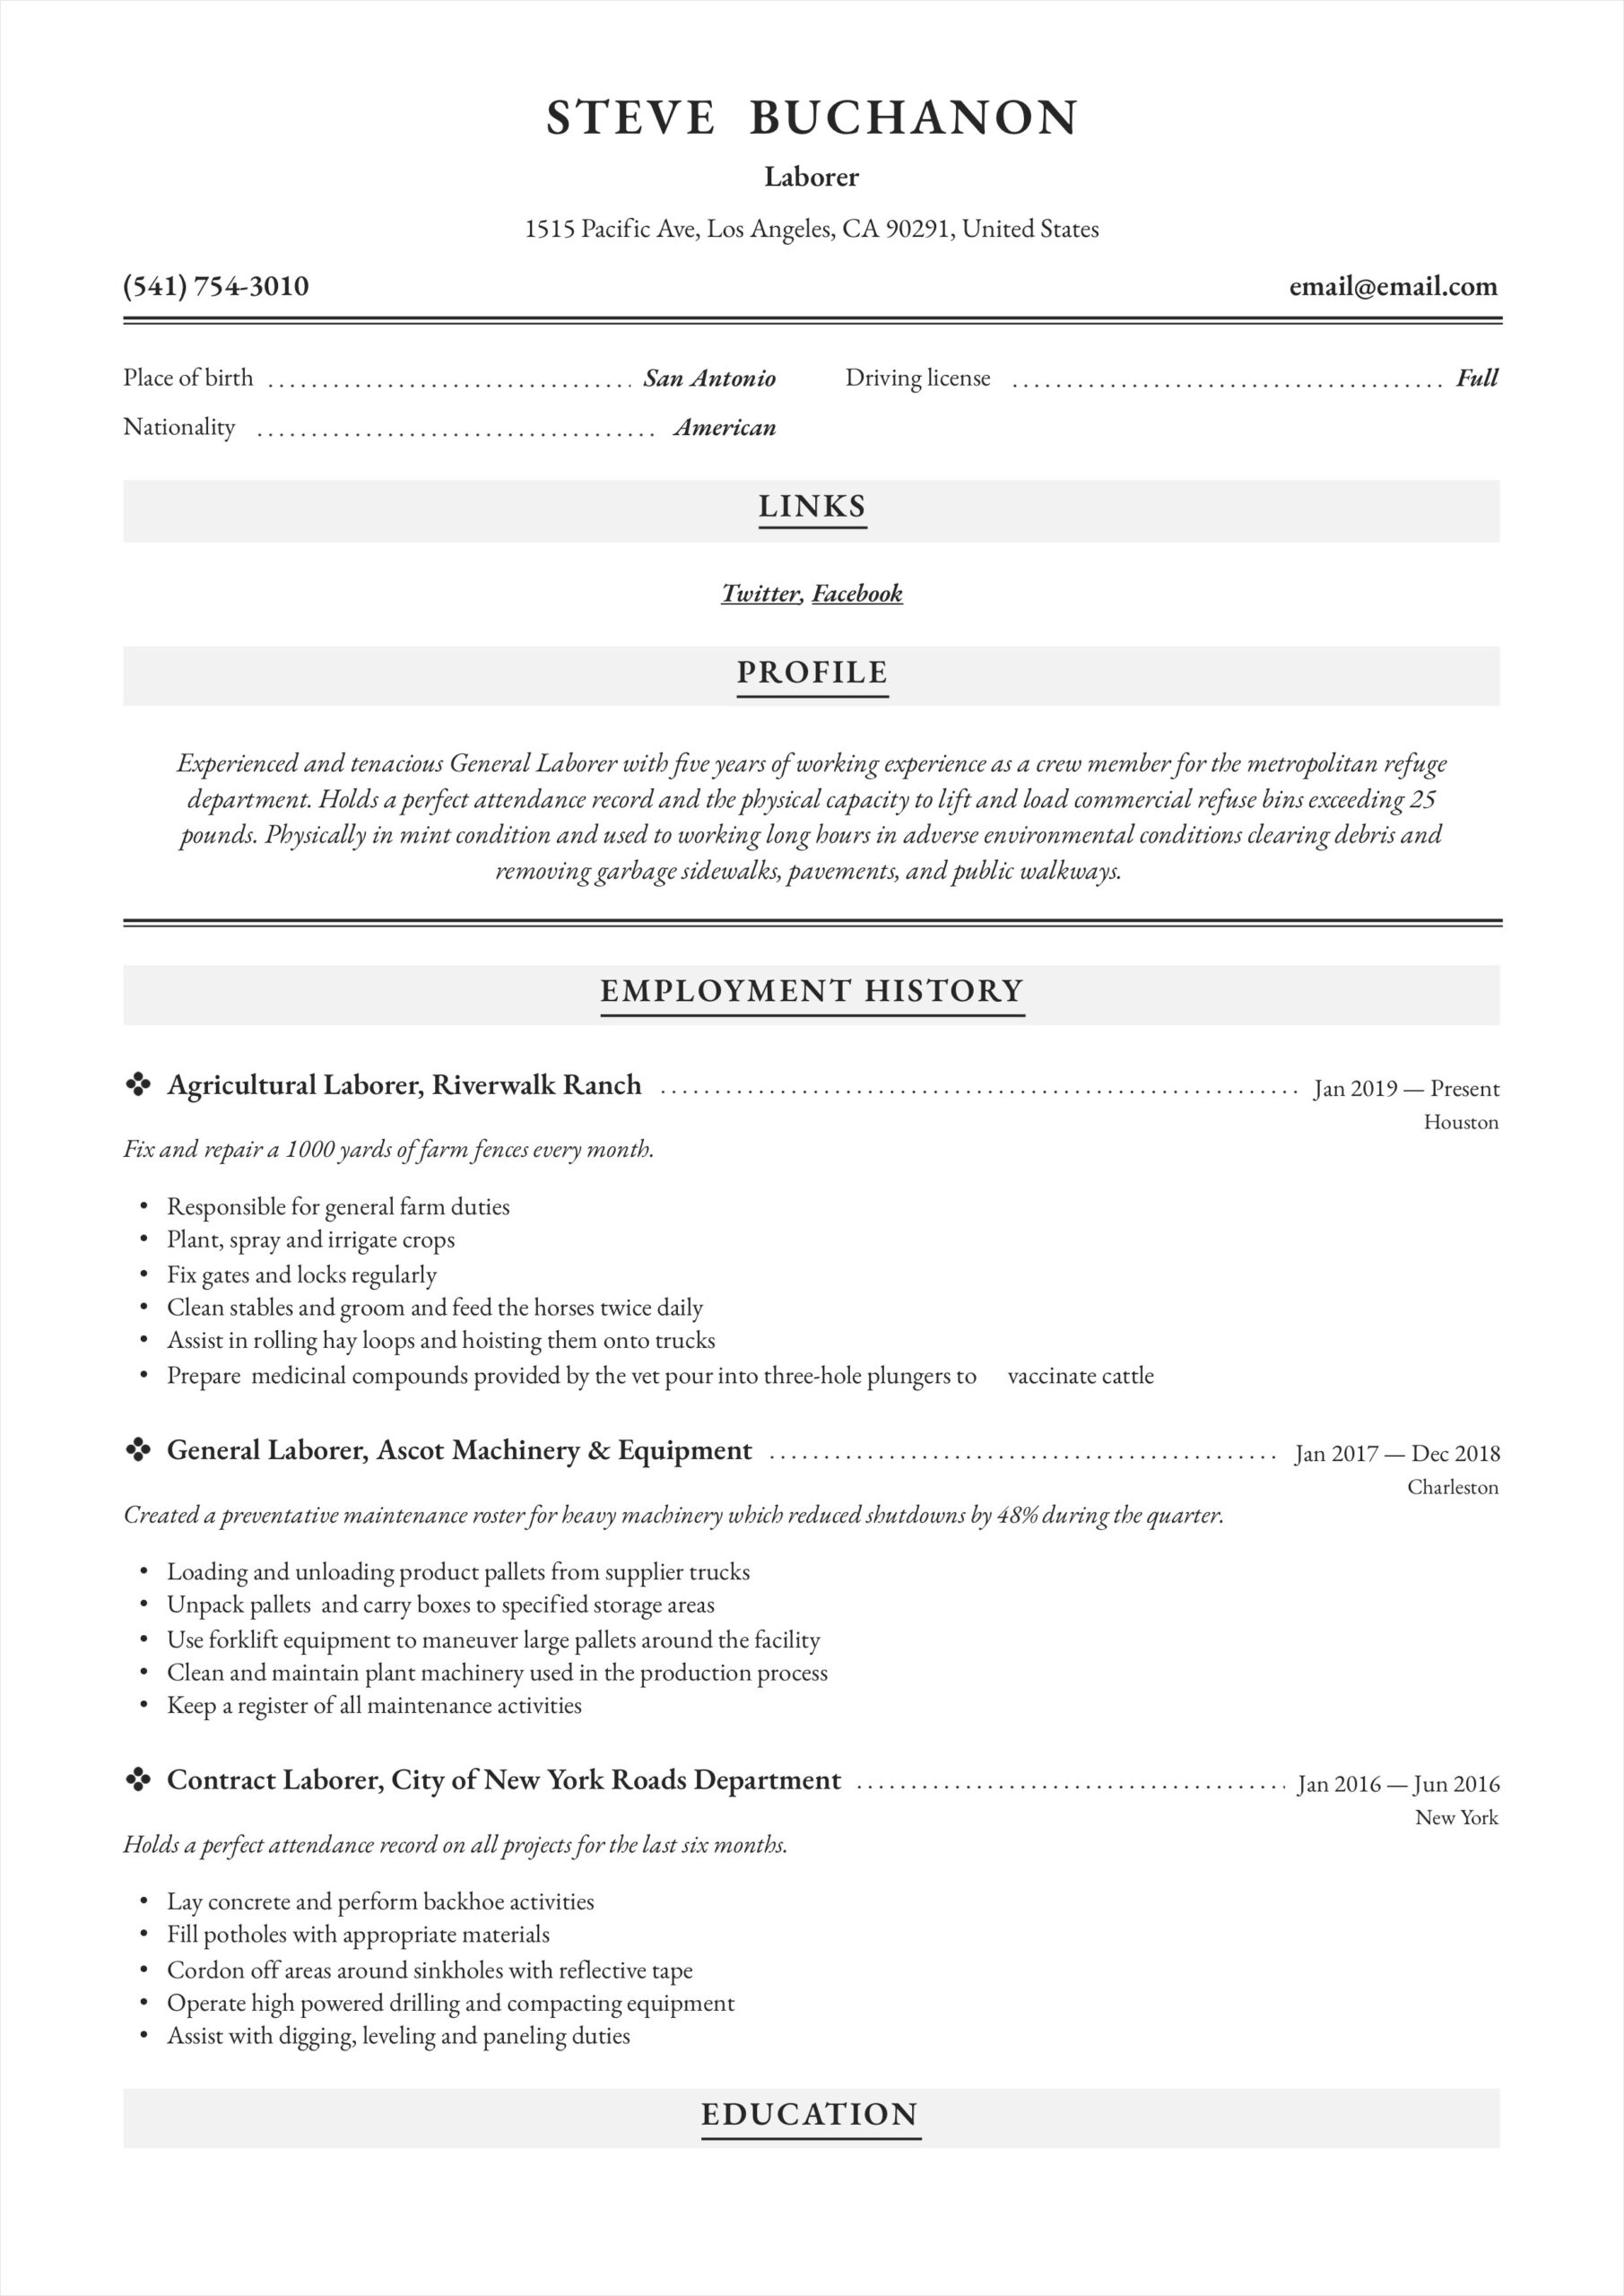 example of resume template for general labor